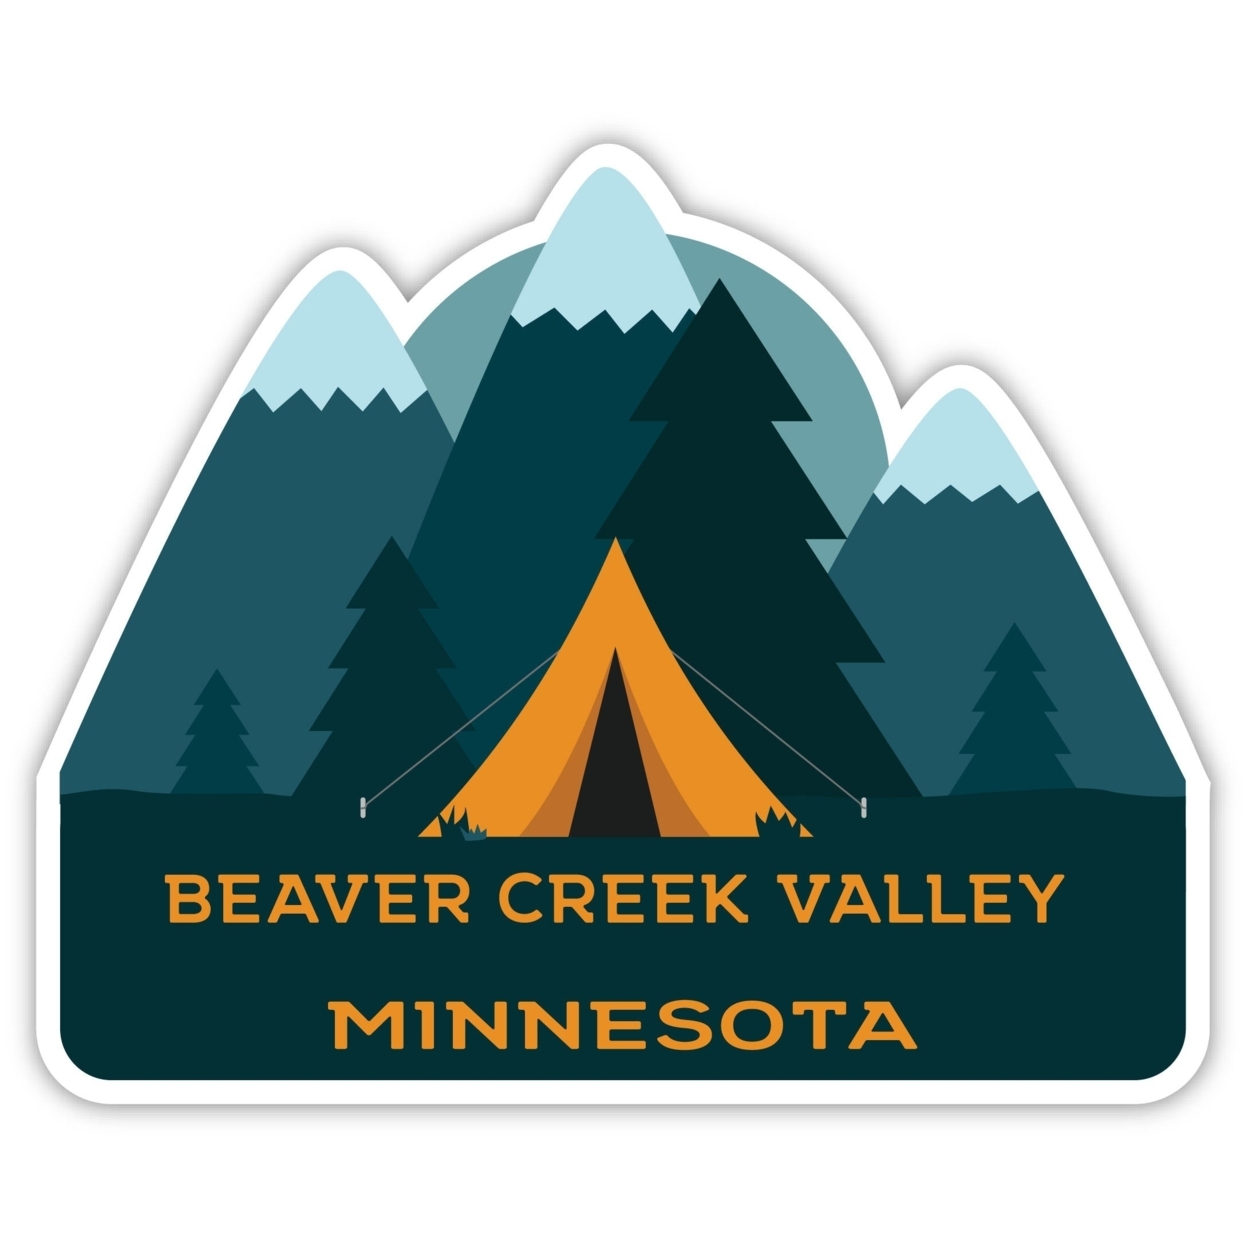 Beaver Creek Valley Minnesota Souvenir Decorative Stickers (Choose Theme And Size) - 4-Pack, 10-Inch, Tent